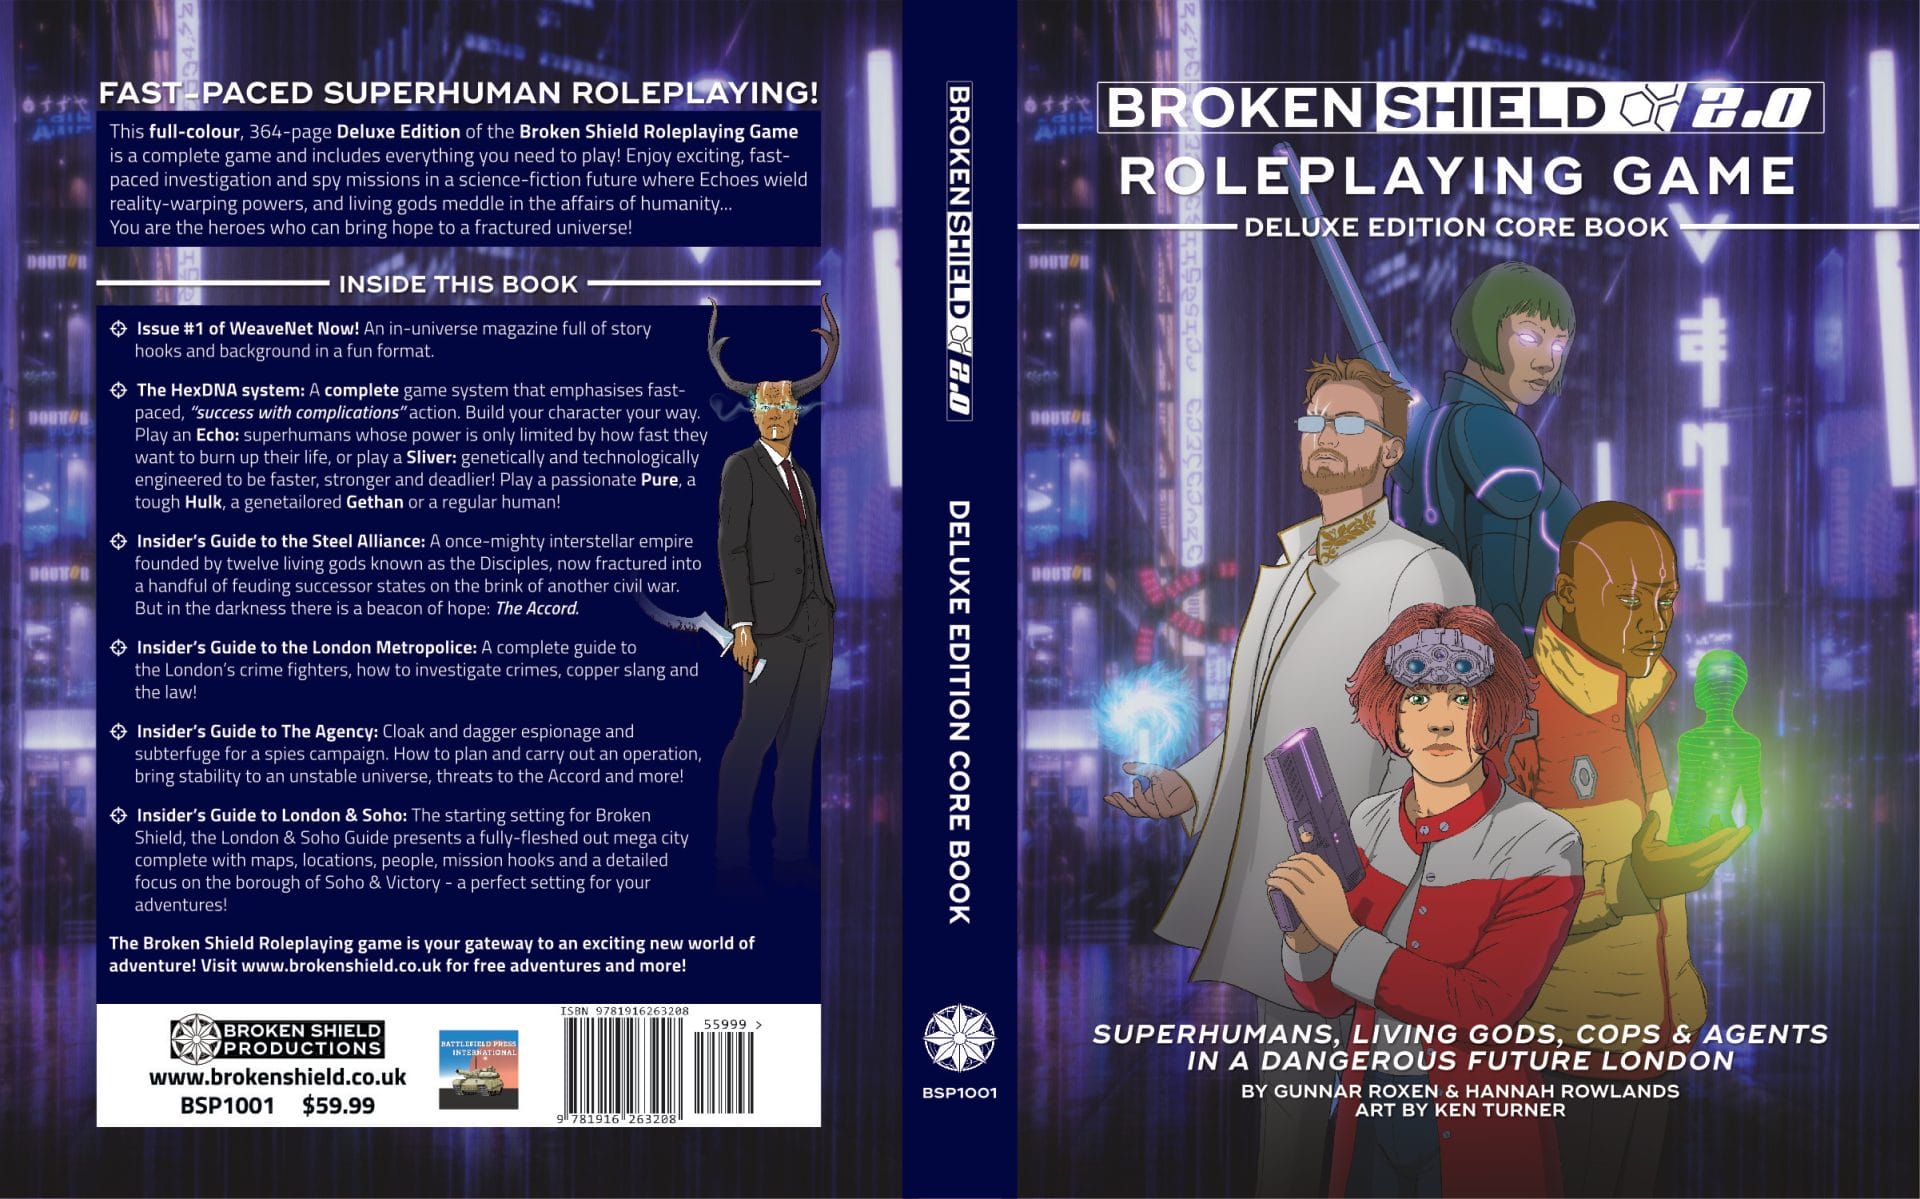 The Broken Shield Roleplaying Game: Deluxe Edition Core Book